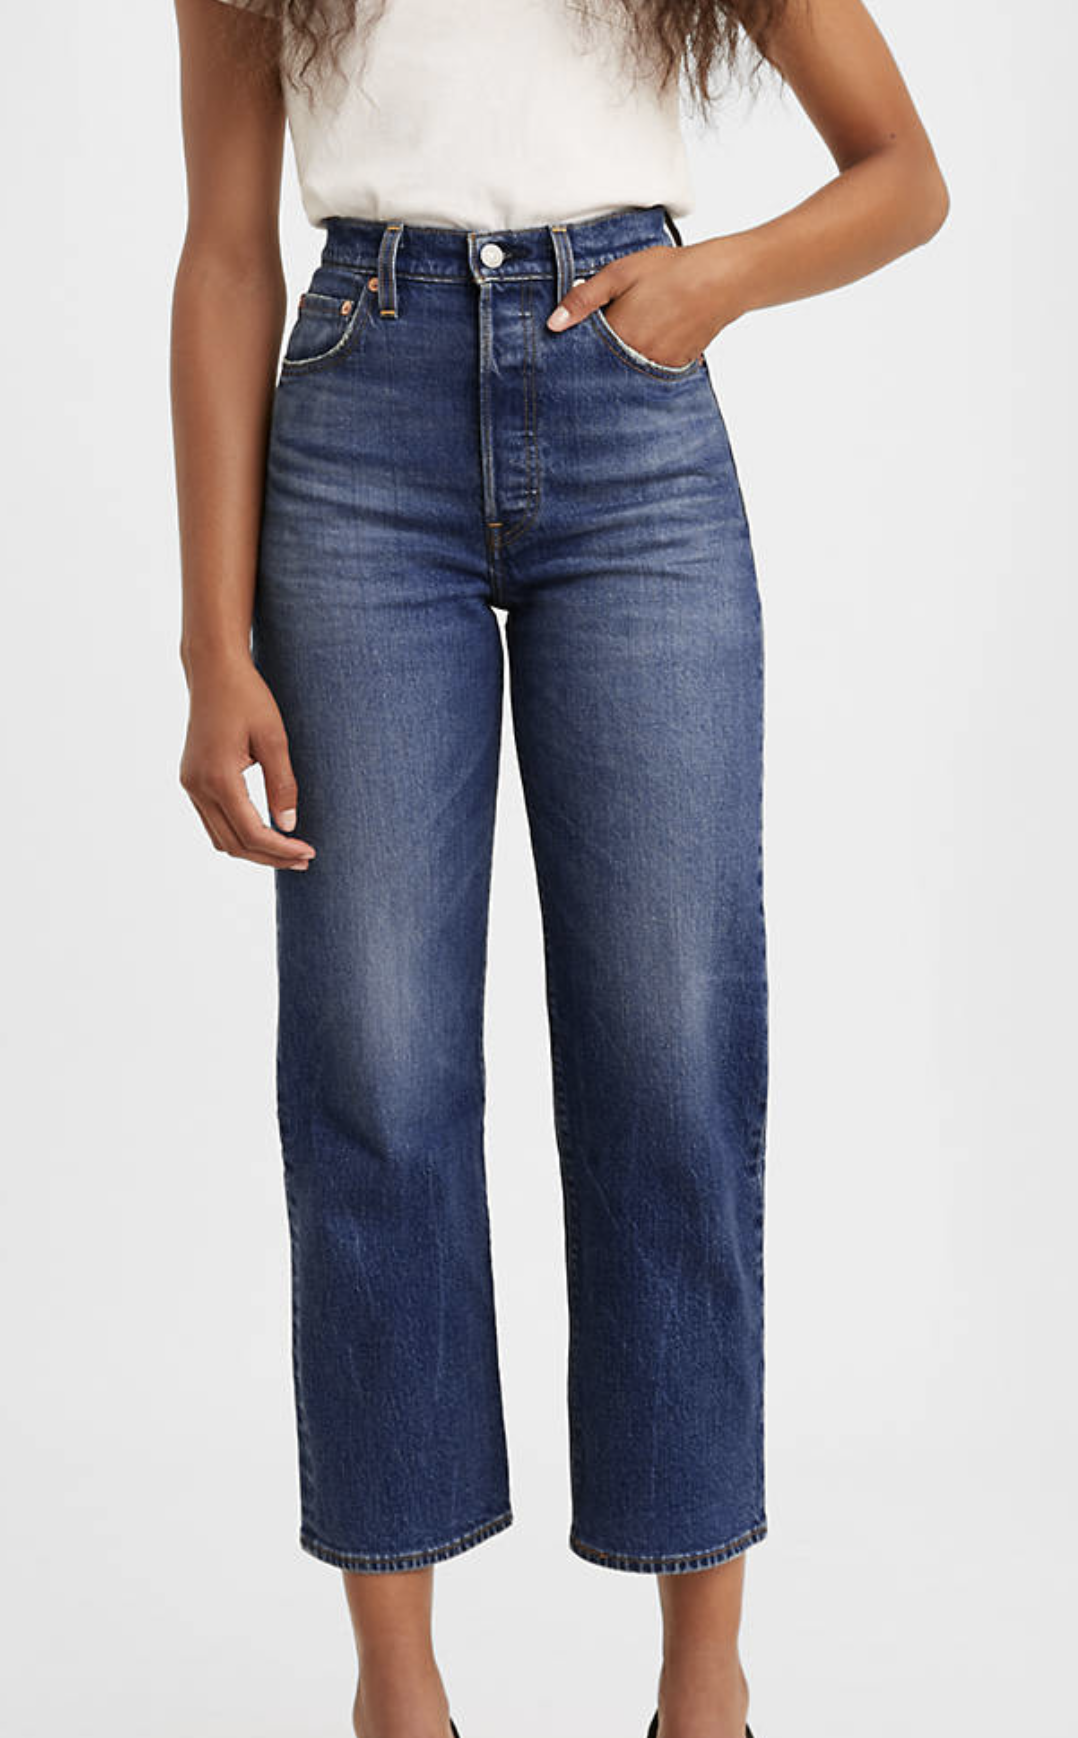  Ribcage Straight Ankle Jeans - Levi’s 